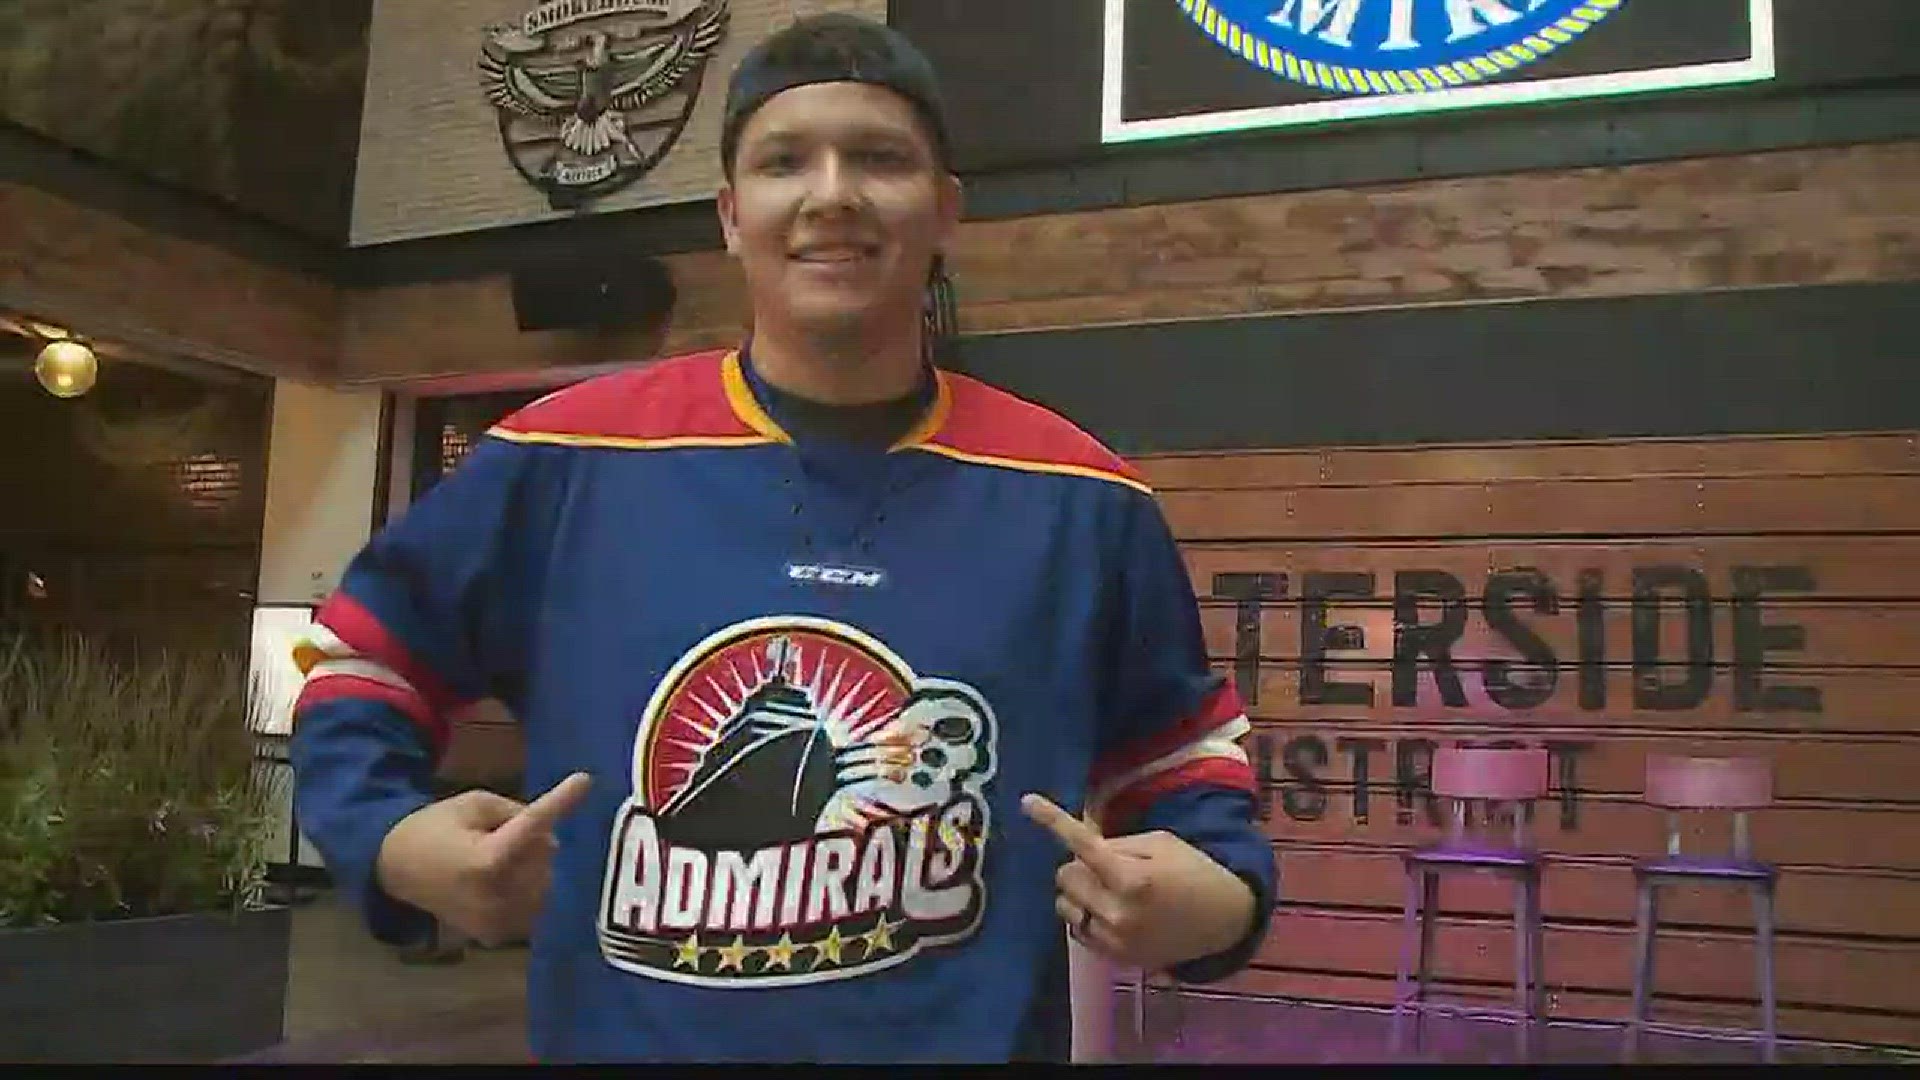 The Norfolk Admirals unveiled the team's new logo on June 1, 2017.